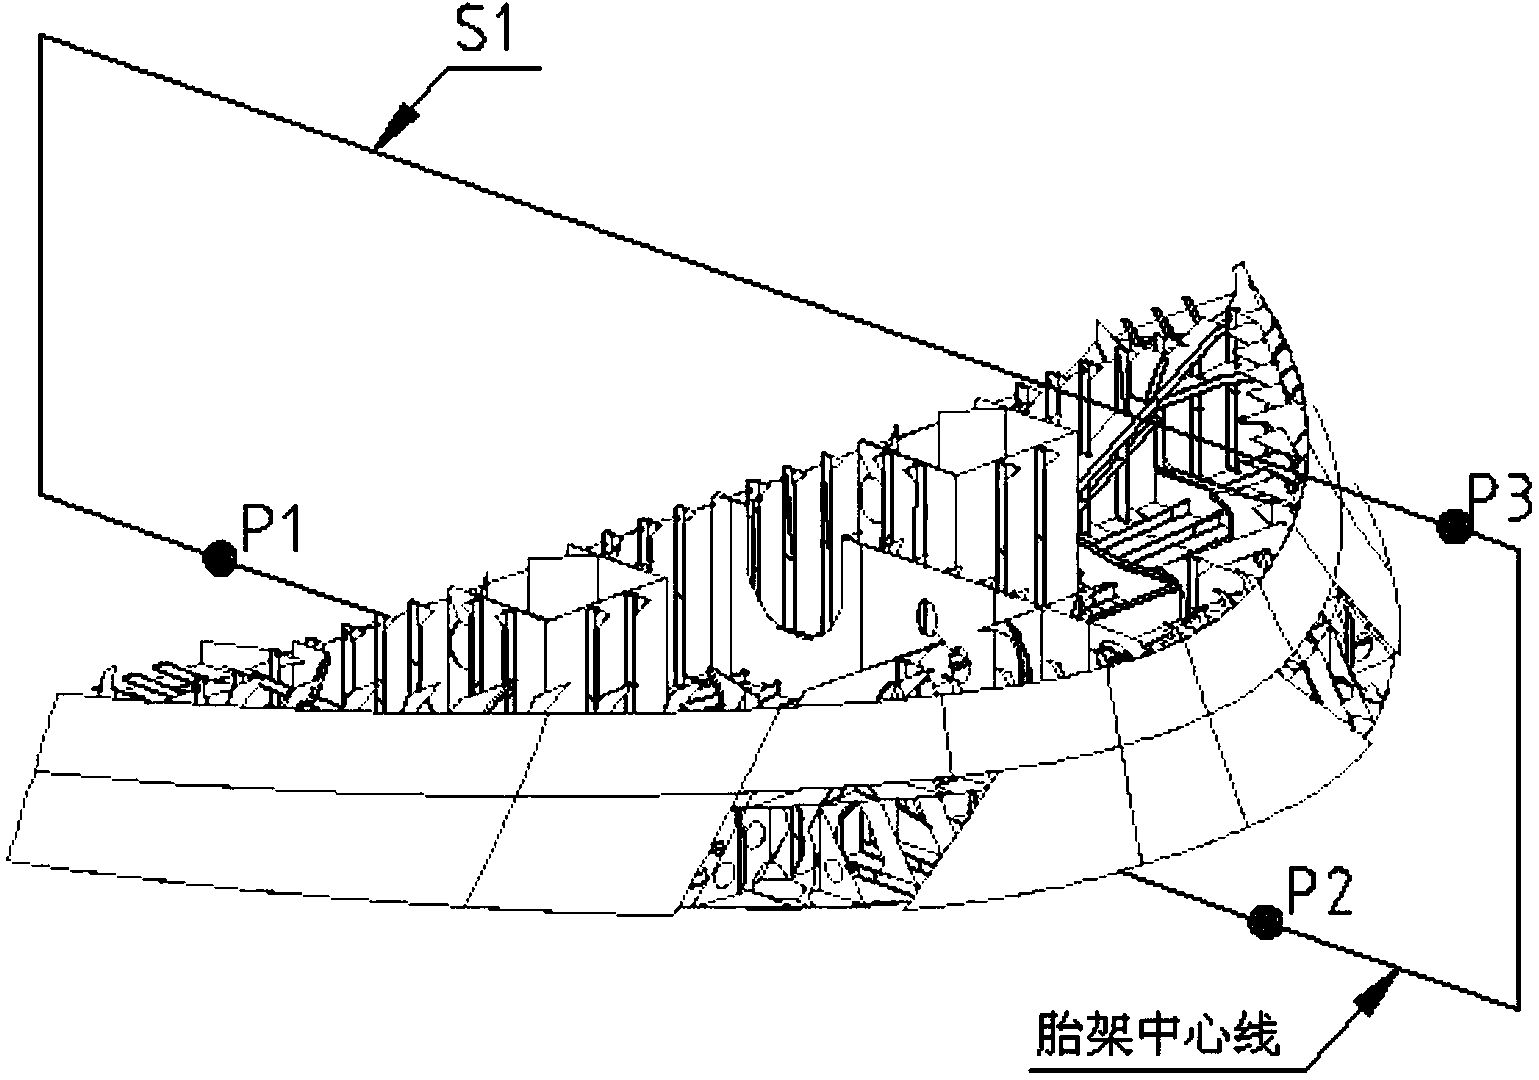 Preassembling method for anchor mouth of bulk frighter in segmentation stage